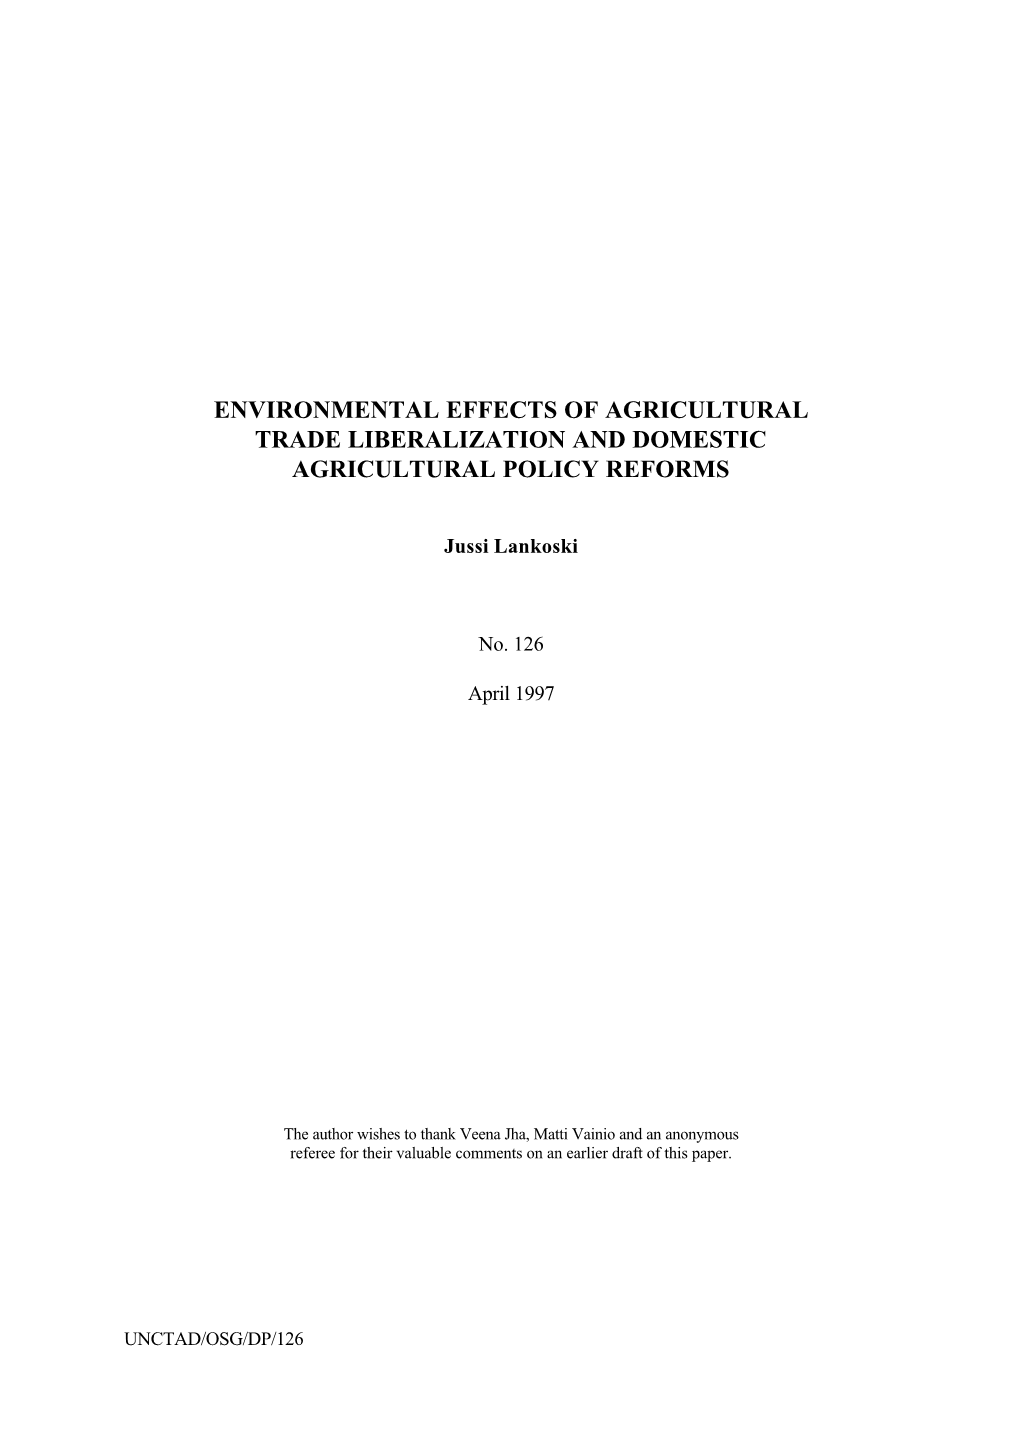 Environmental Effects of Agricultural Trade Liberalization and Domestic Agricultural Policy Reforms